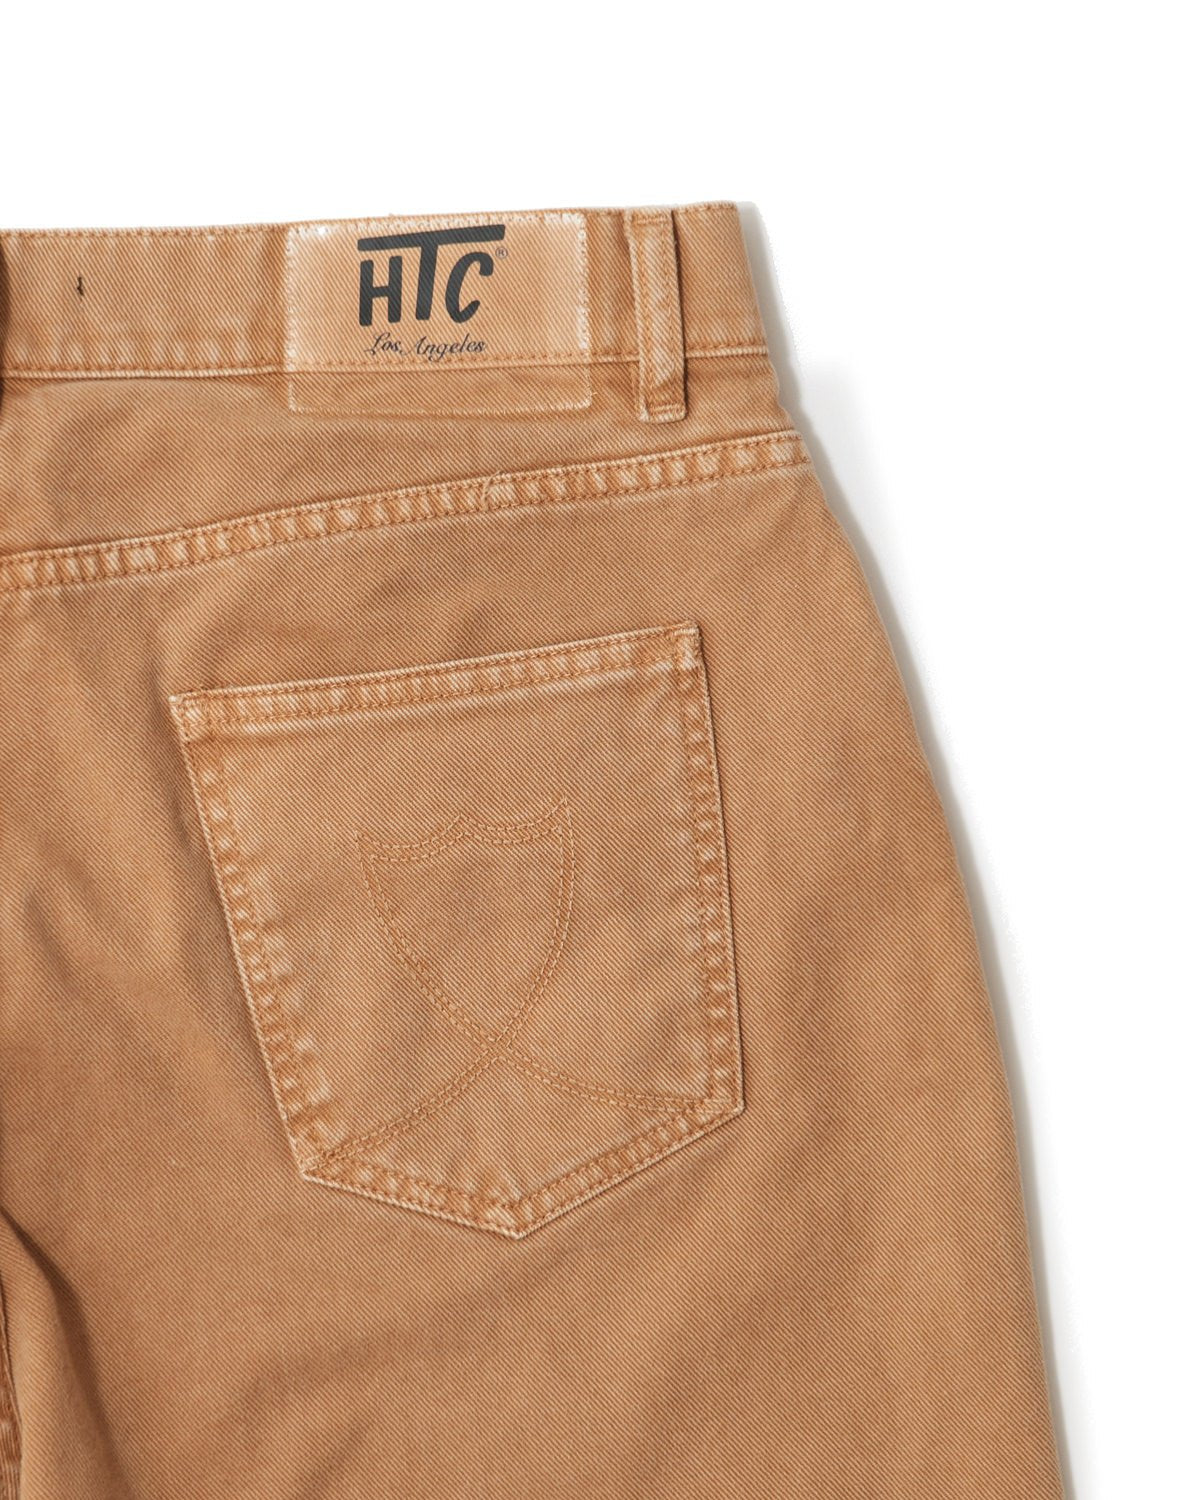 LOOSE NEVADA Loose fit jeans, 5 pockets, hidden front button closure. 100% cotton. Made in Italy. HTC LOS ANGELES